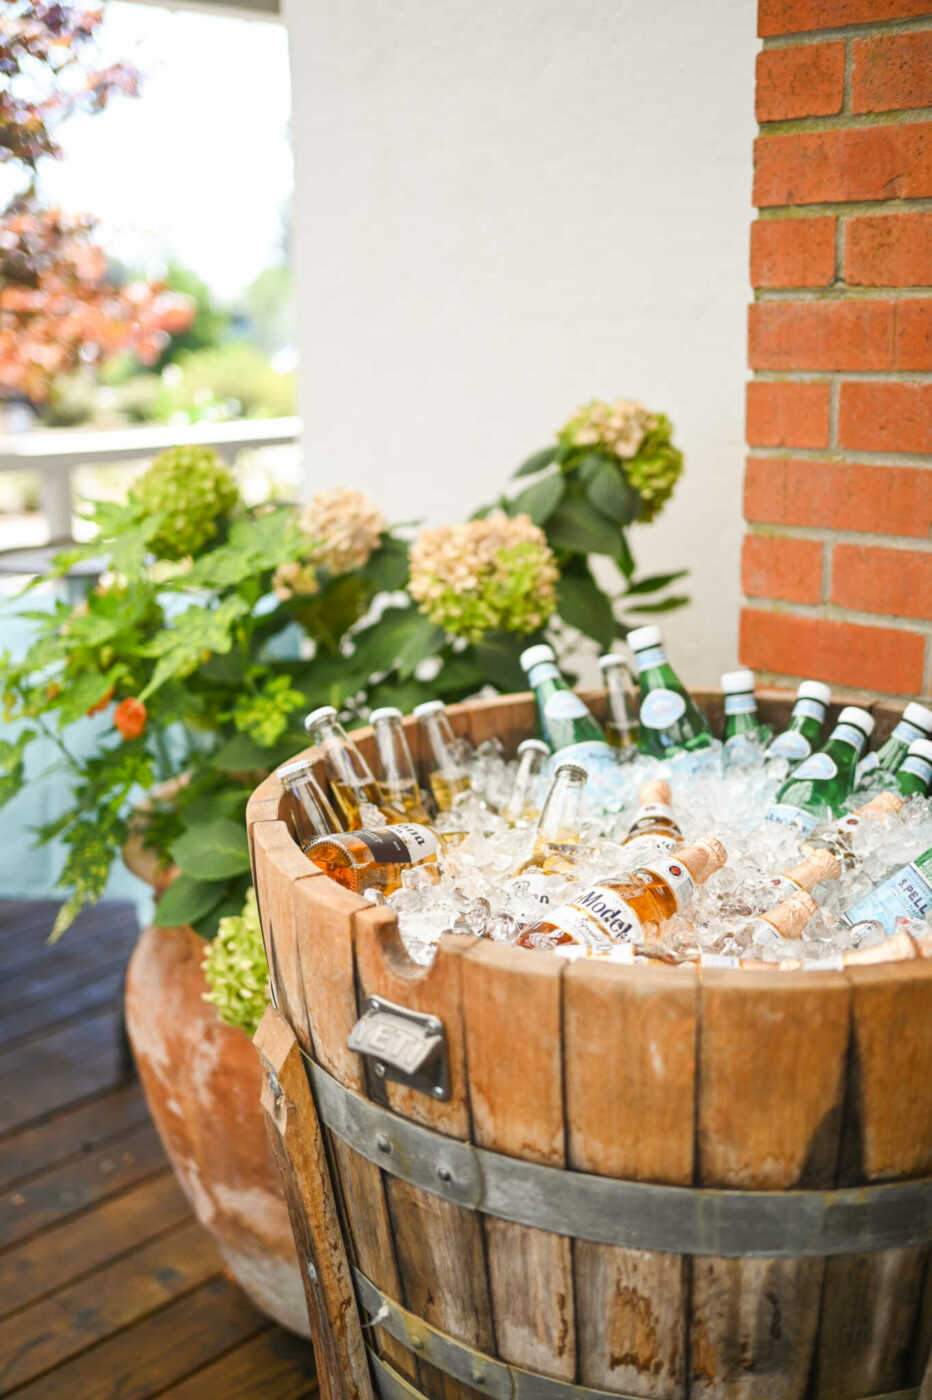 A wooden barrel filled with beer bottles on a wooden deck.